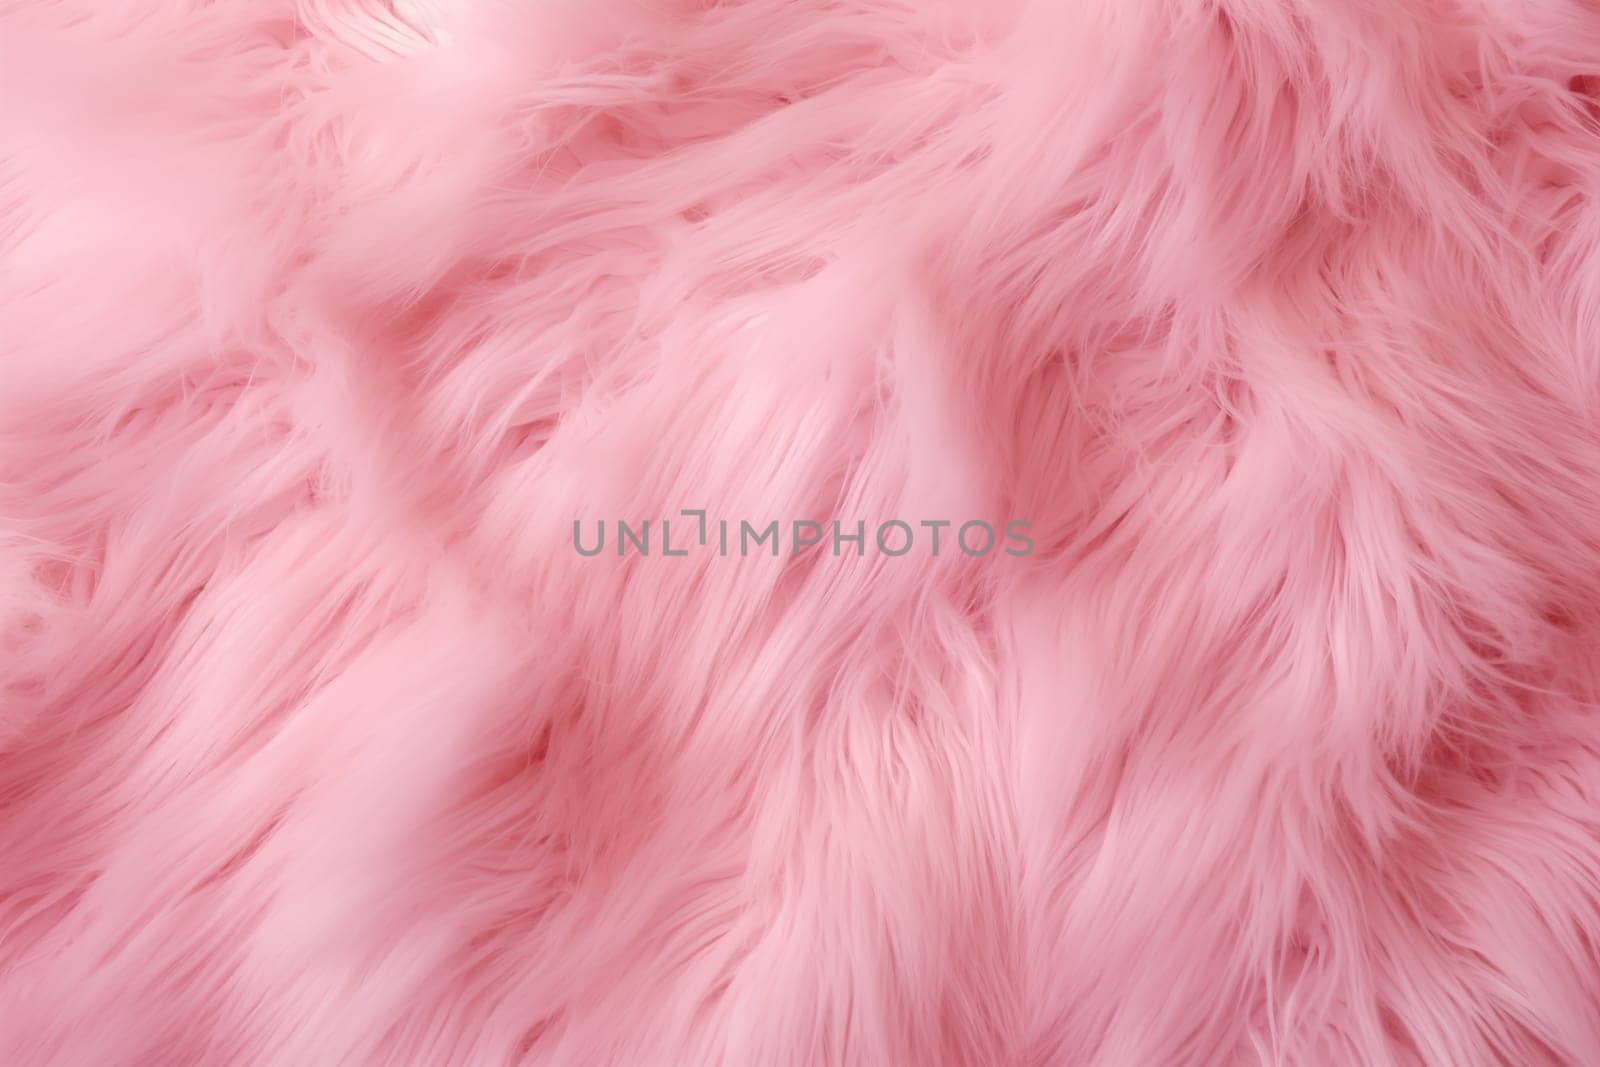 Pink fur texture top view. Pink sheepskin background. Fur pattern. Texture of pink shaggy fur. Wool texture. Sheep fur close up by Nadtochiy